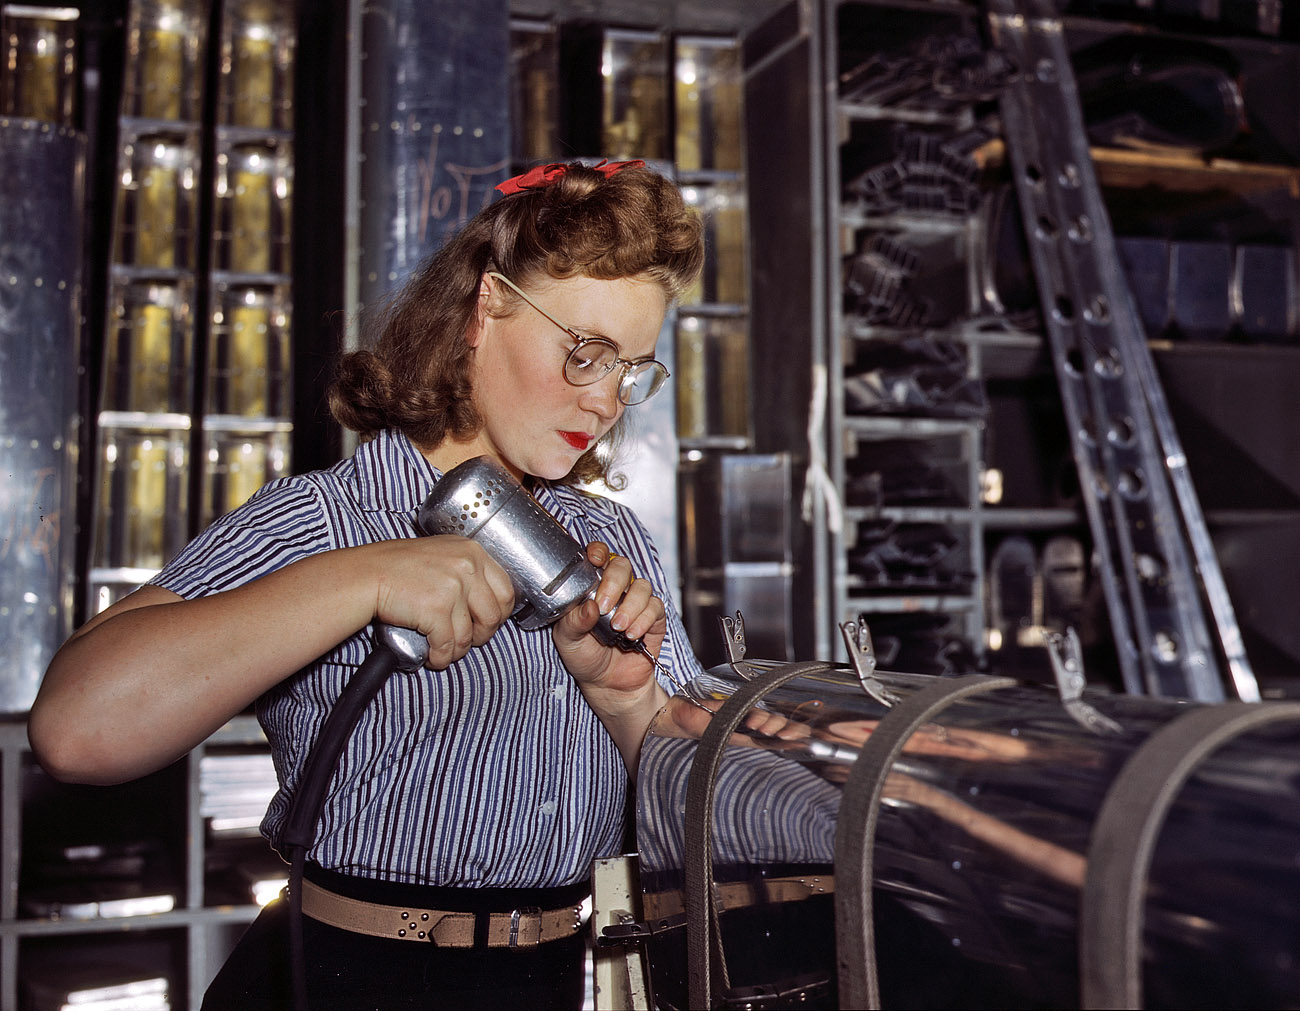 October 1942. Inglewood, California. North American Aviation drill operator in the control surface department assembling horizontal stabilizer section of an airplane. View full size. 4x5 Kodachrome transparency by Alfred Palmer.